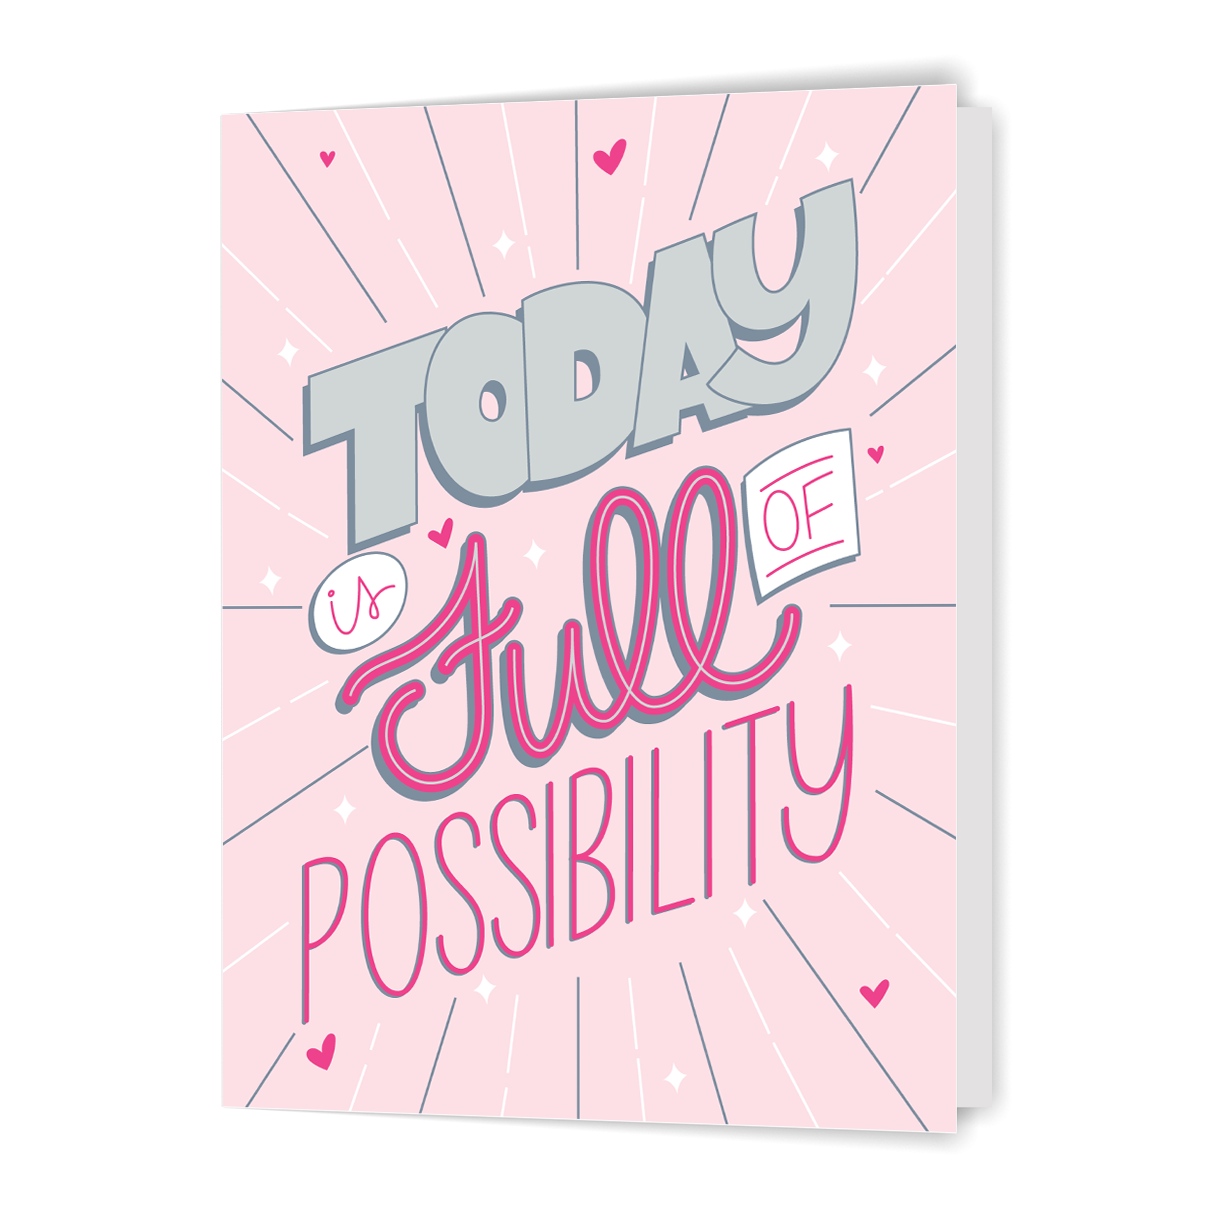 Today is Full of Possibility - Greeting Card